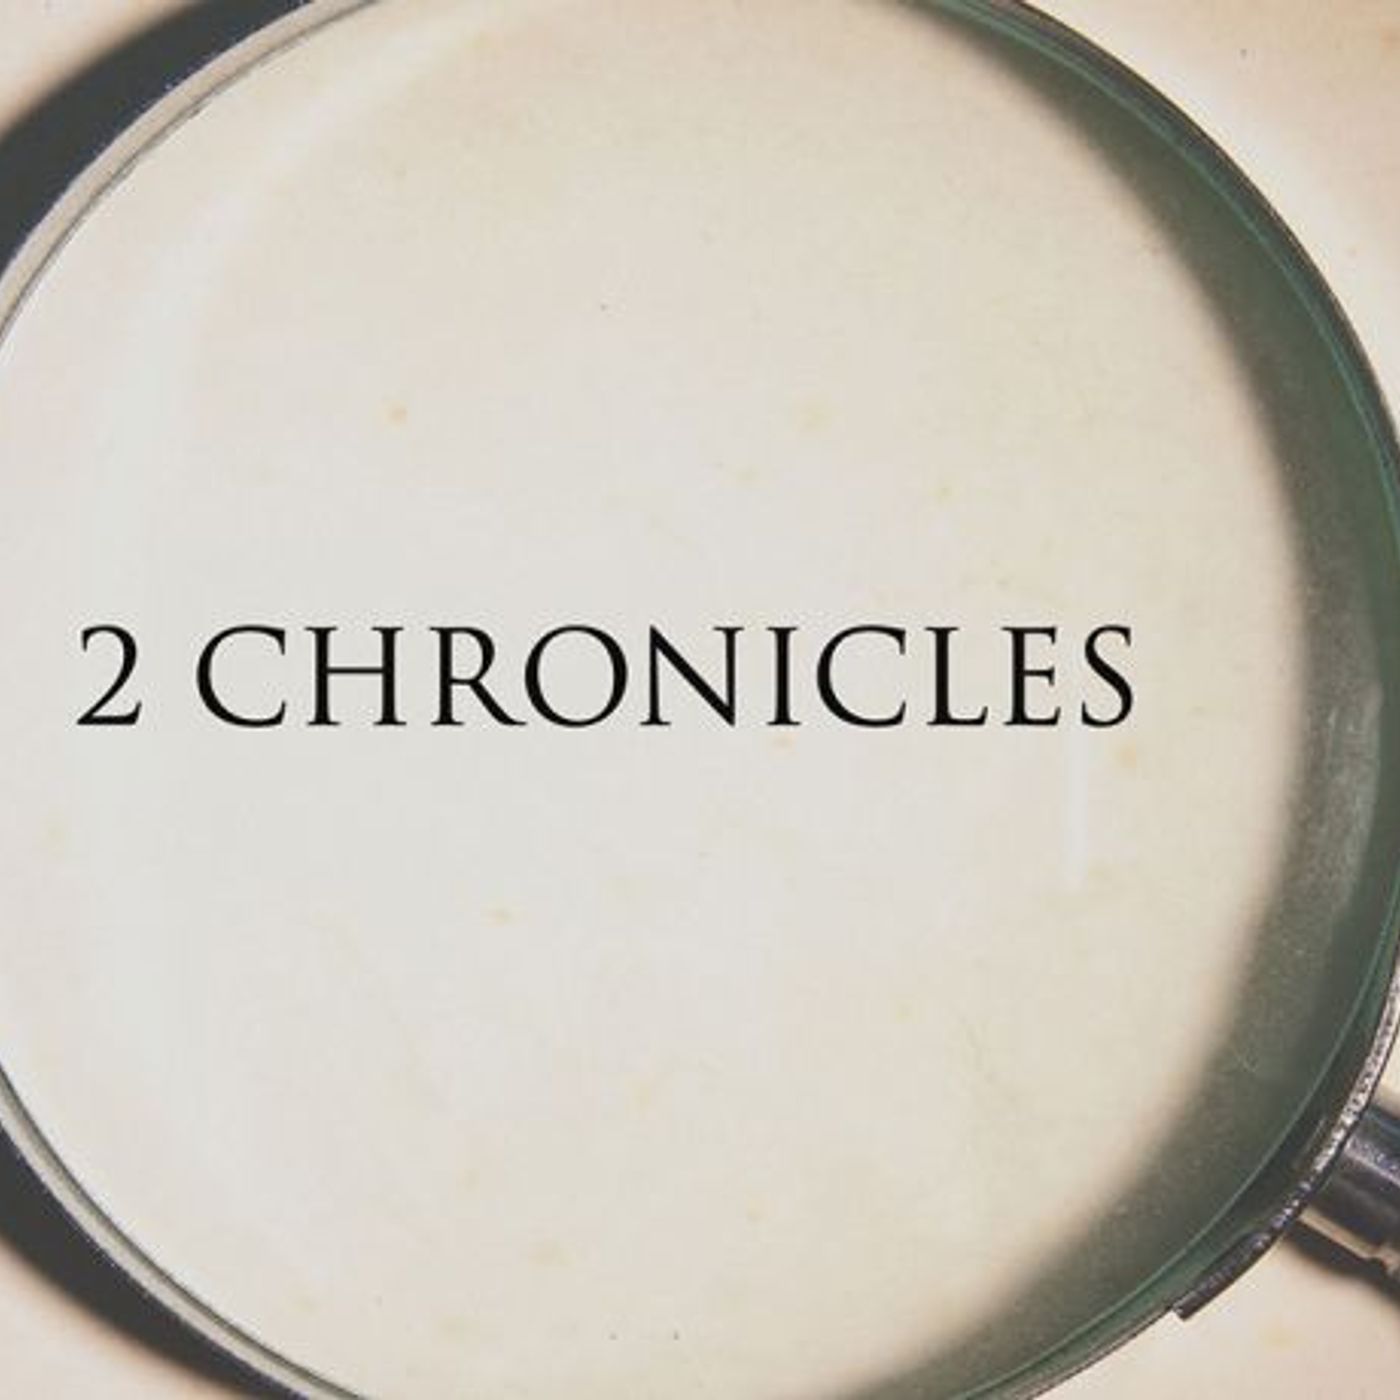 Bible Study Exercise: 2 Chronicles 24